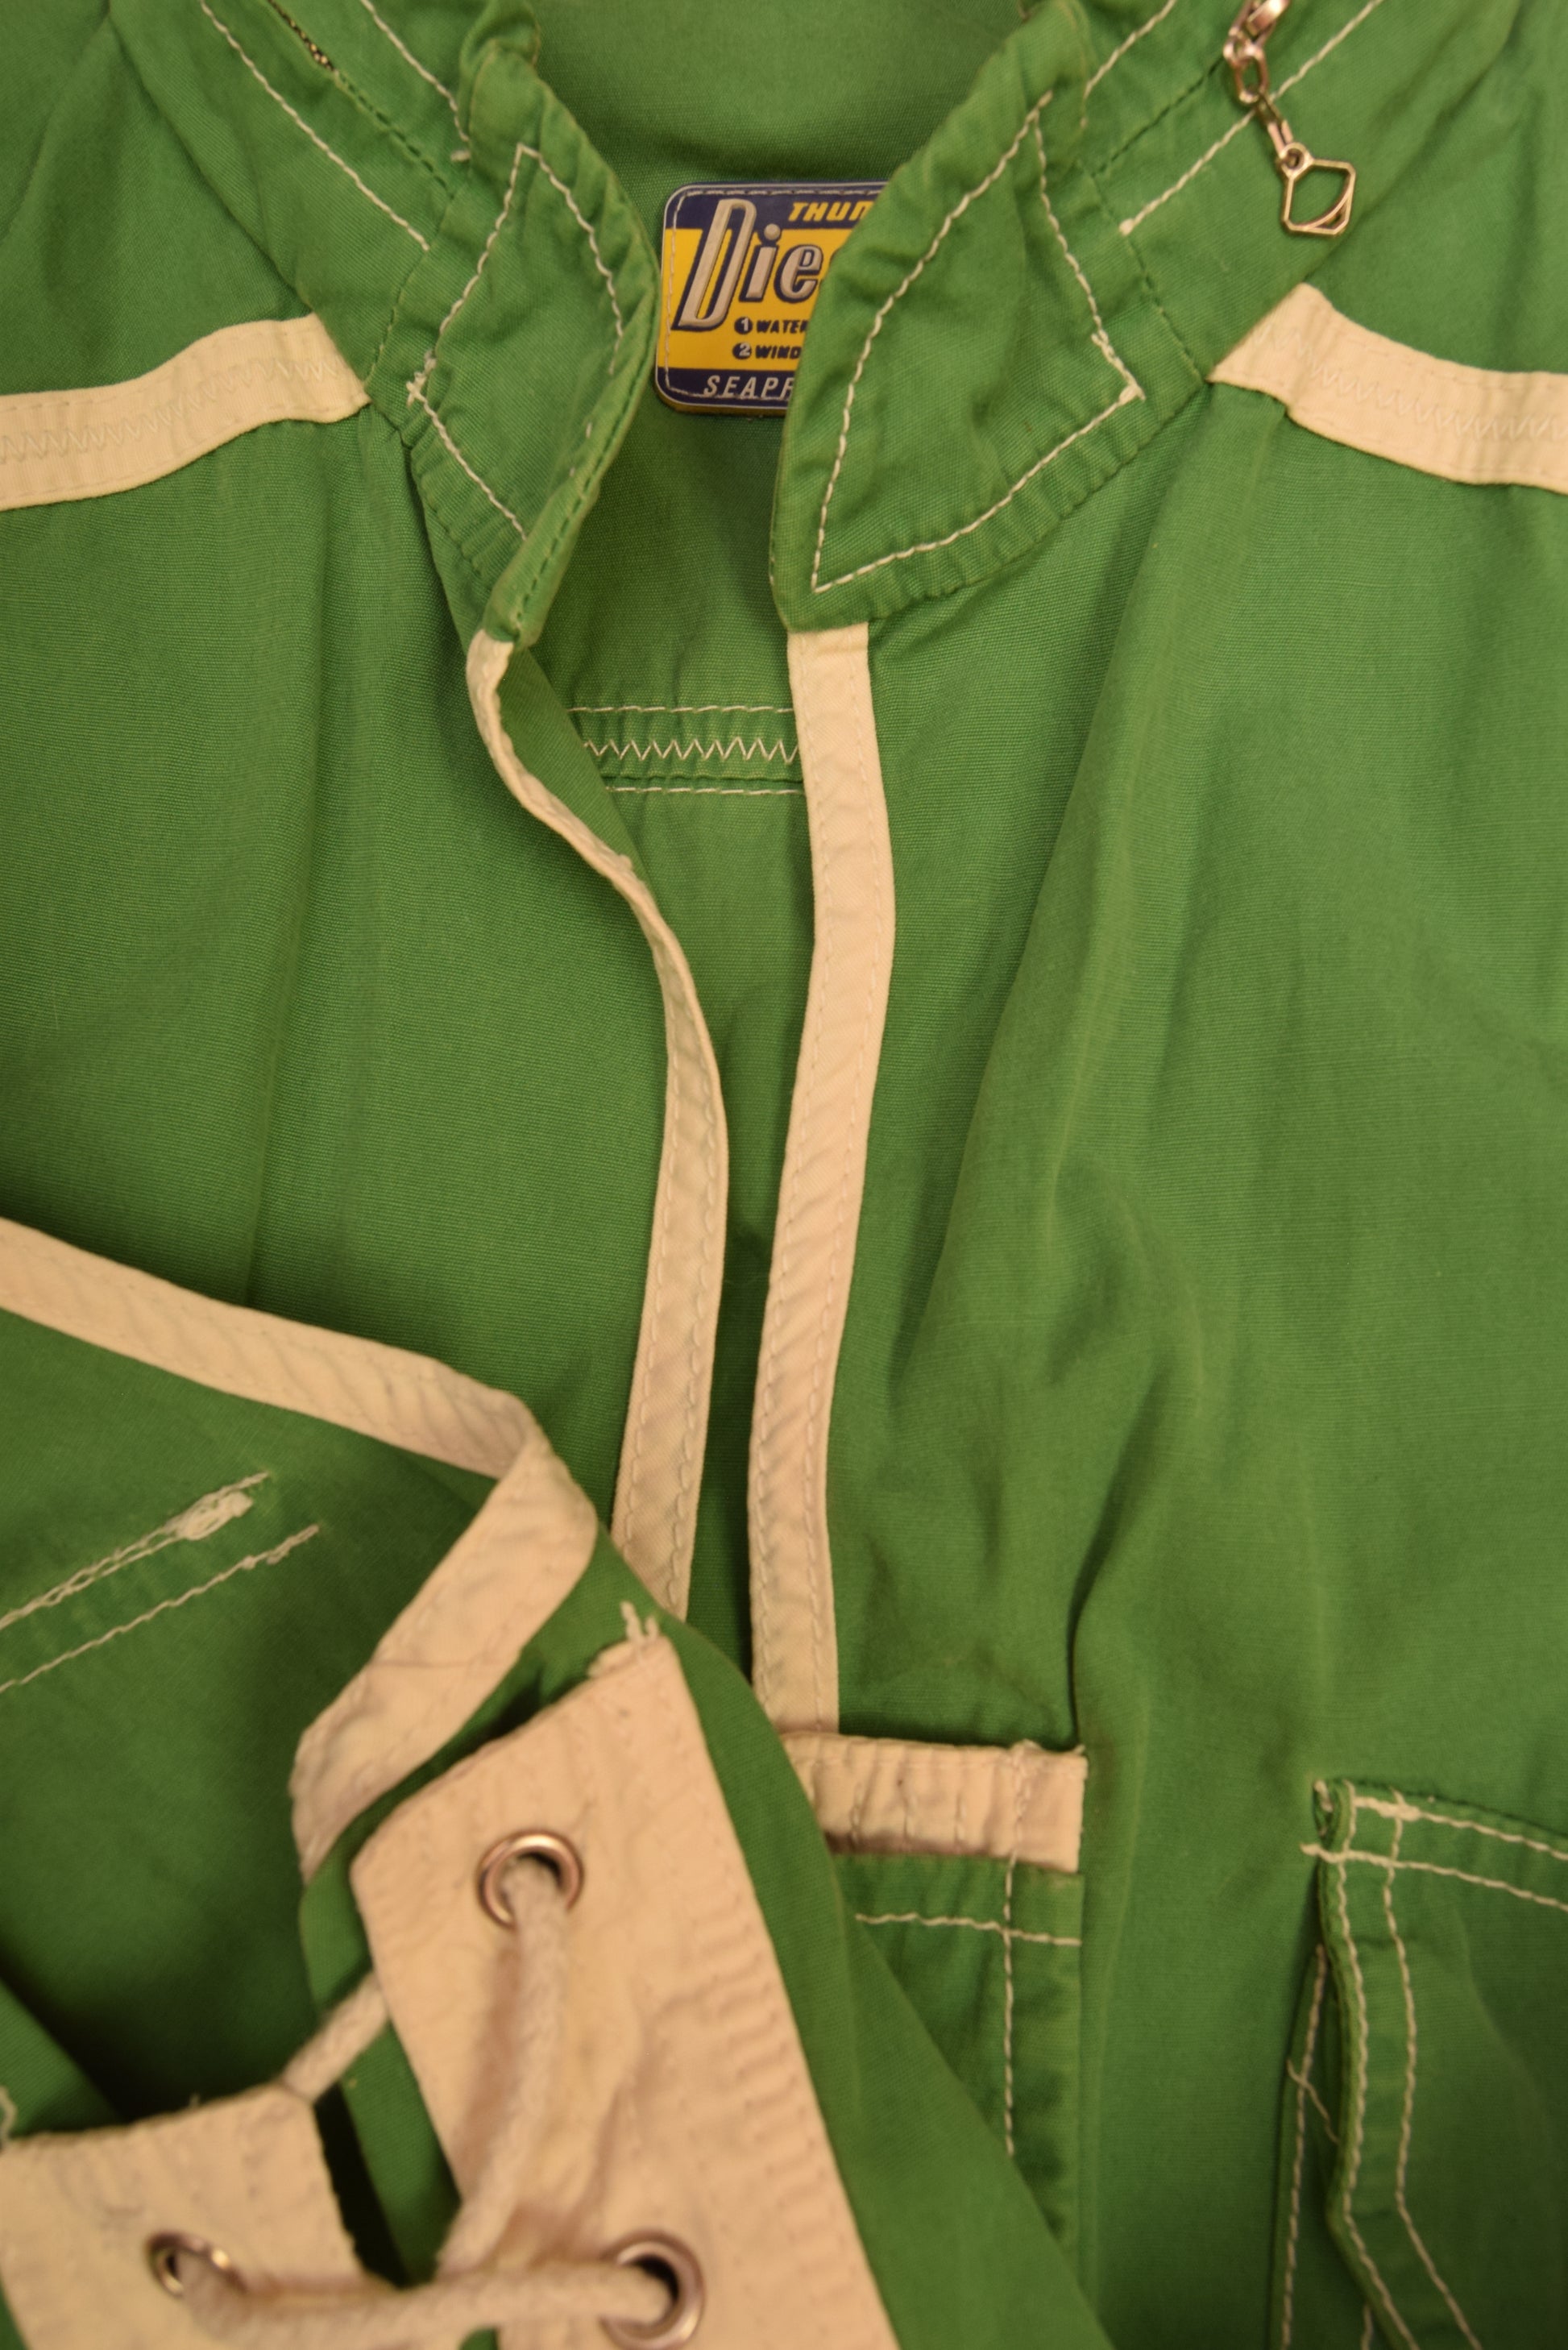 Vintage 80's Diesel Thunder Boating Vest Utilitarian Technical Water Resistant Wind Proof Seaproof Outboard Repair Diesel Inc. Everything Nautical Made in Italy Size L Green